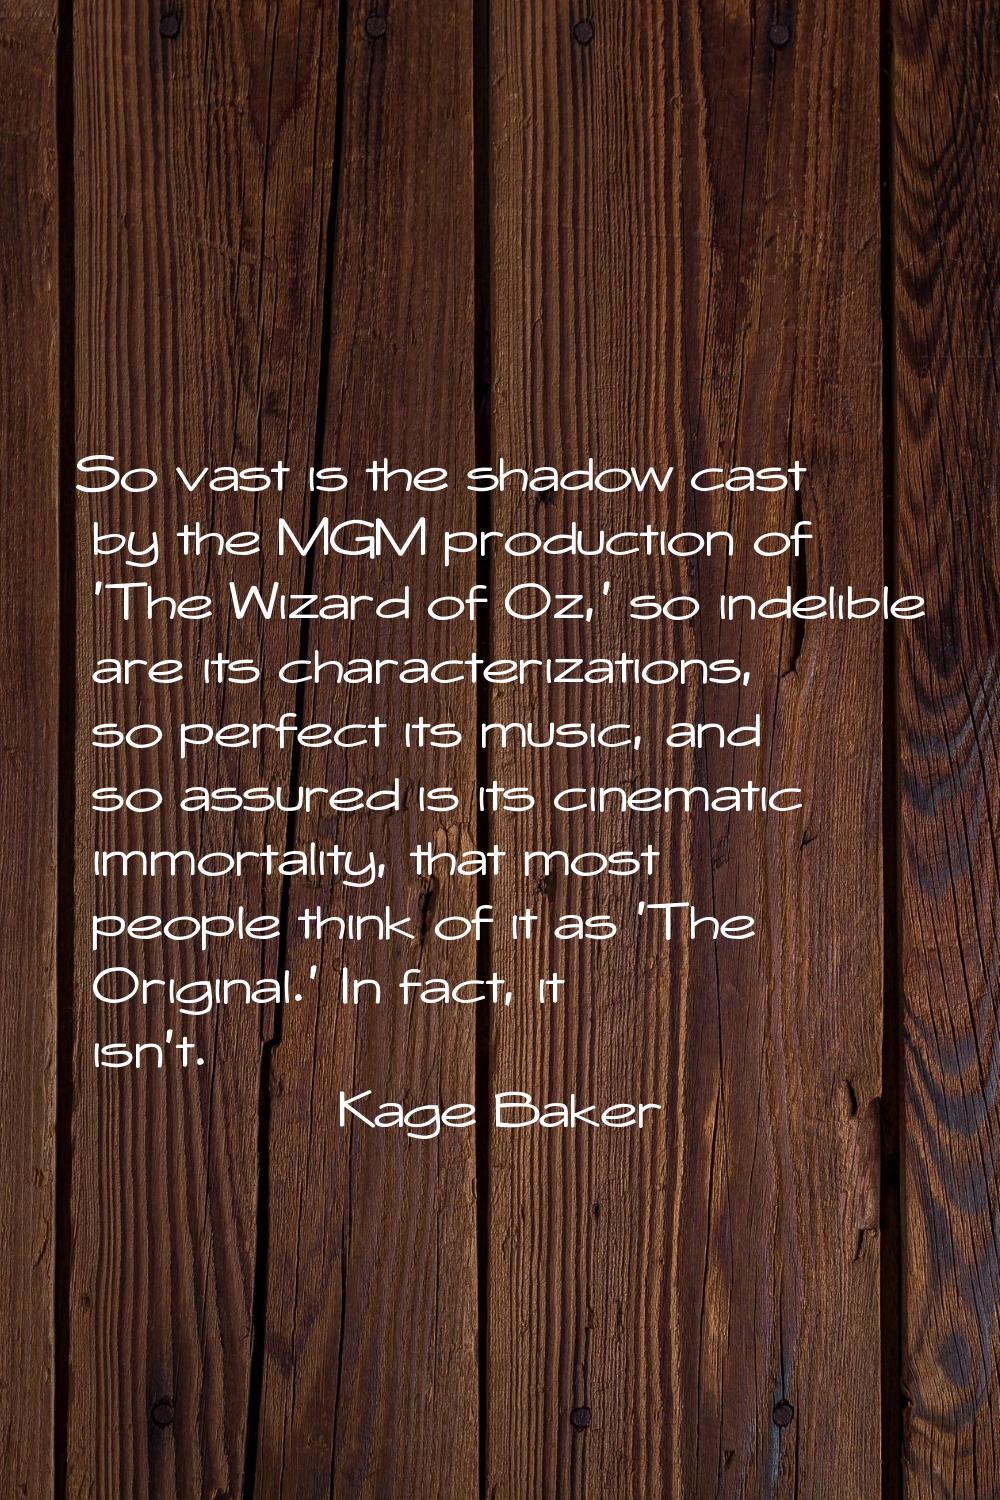 So vast is the shadow cast by the MGM production of 'The Wizard of Oz,' so indelible are its charac